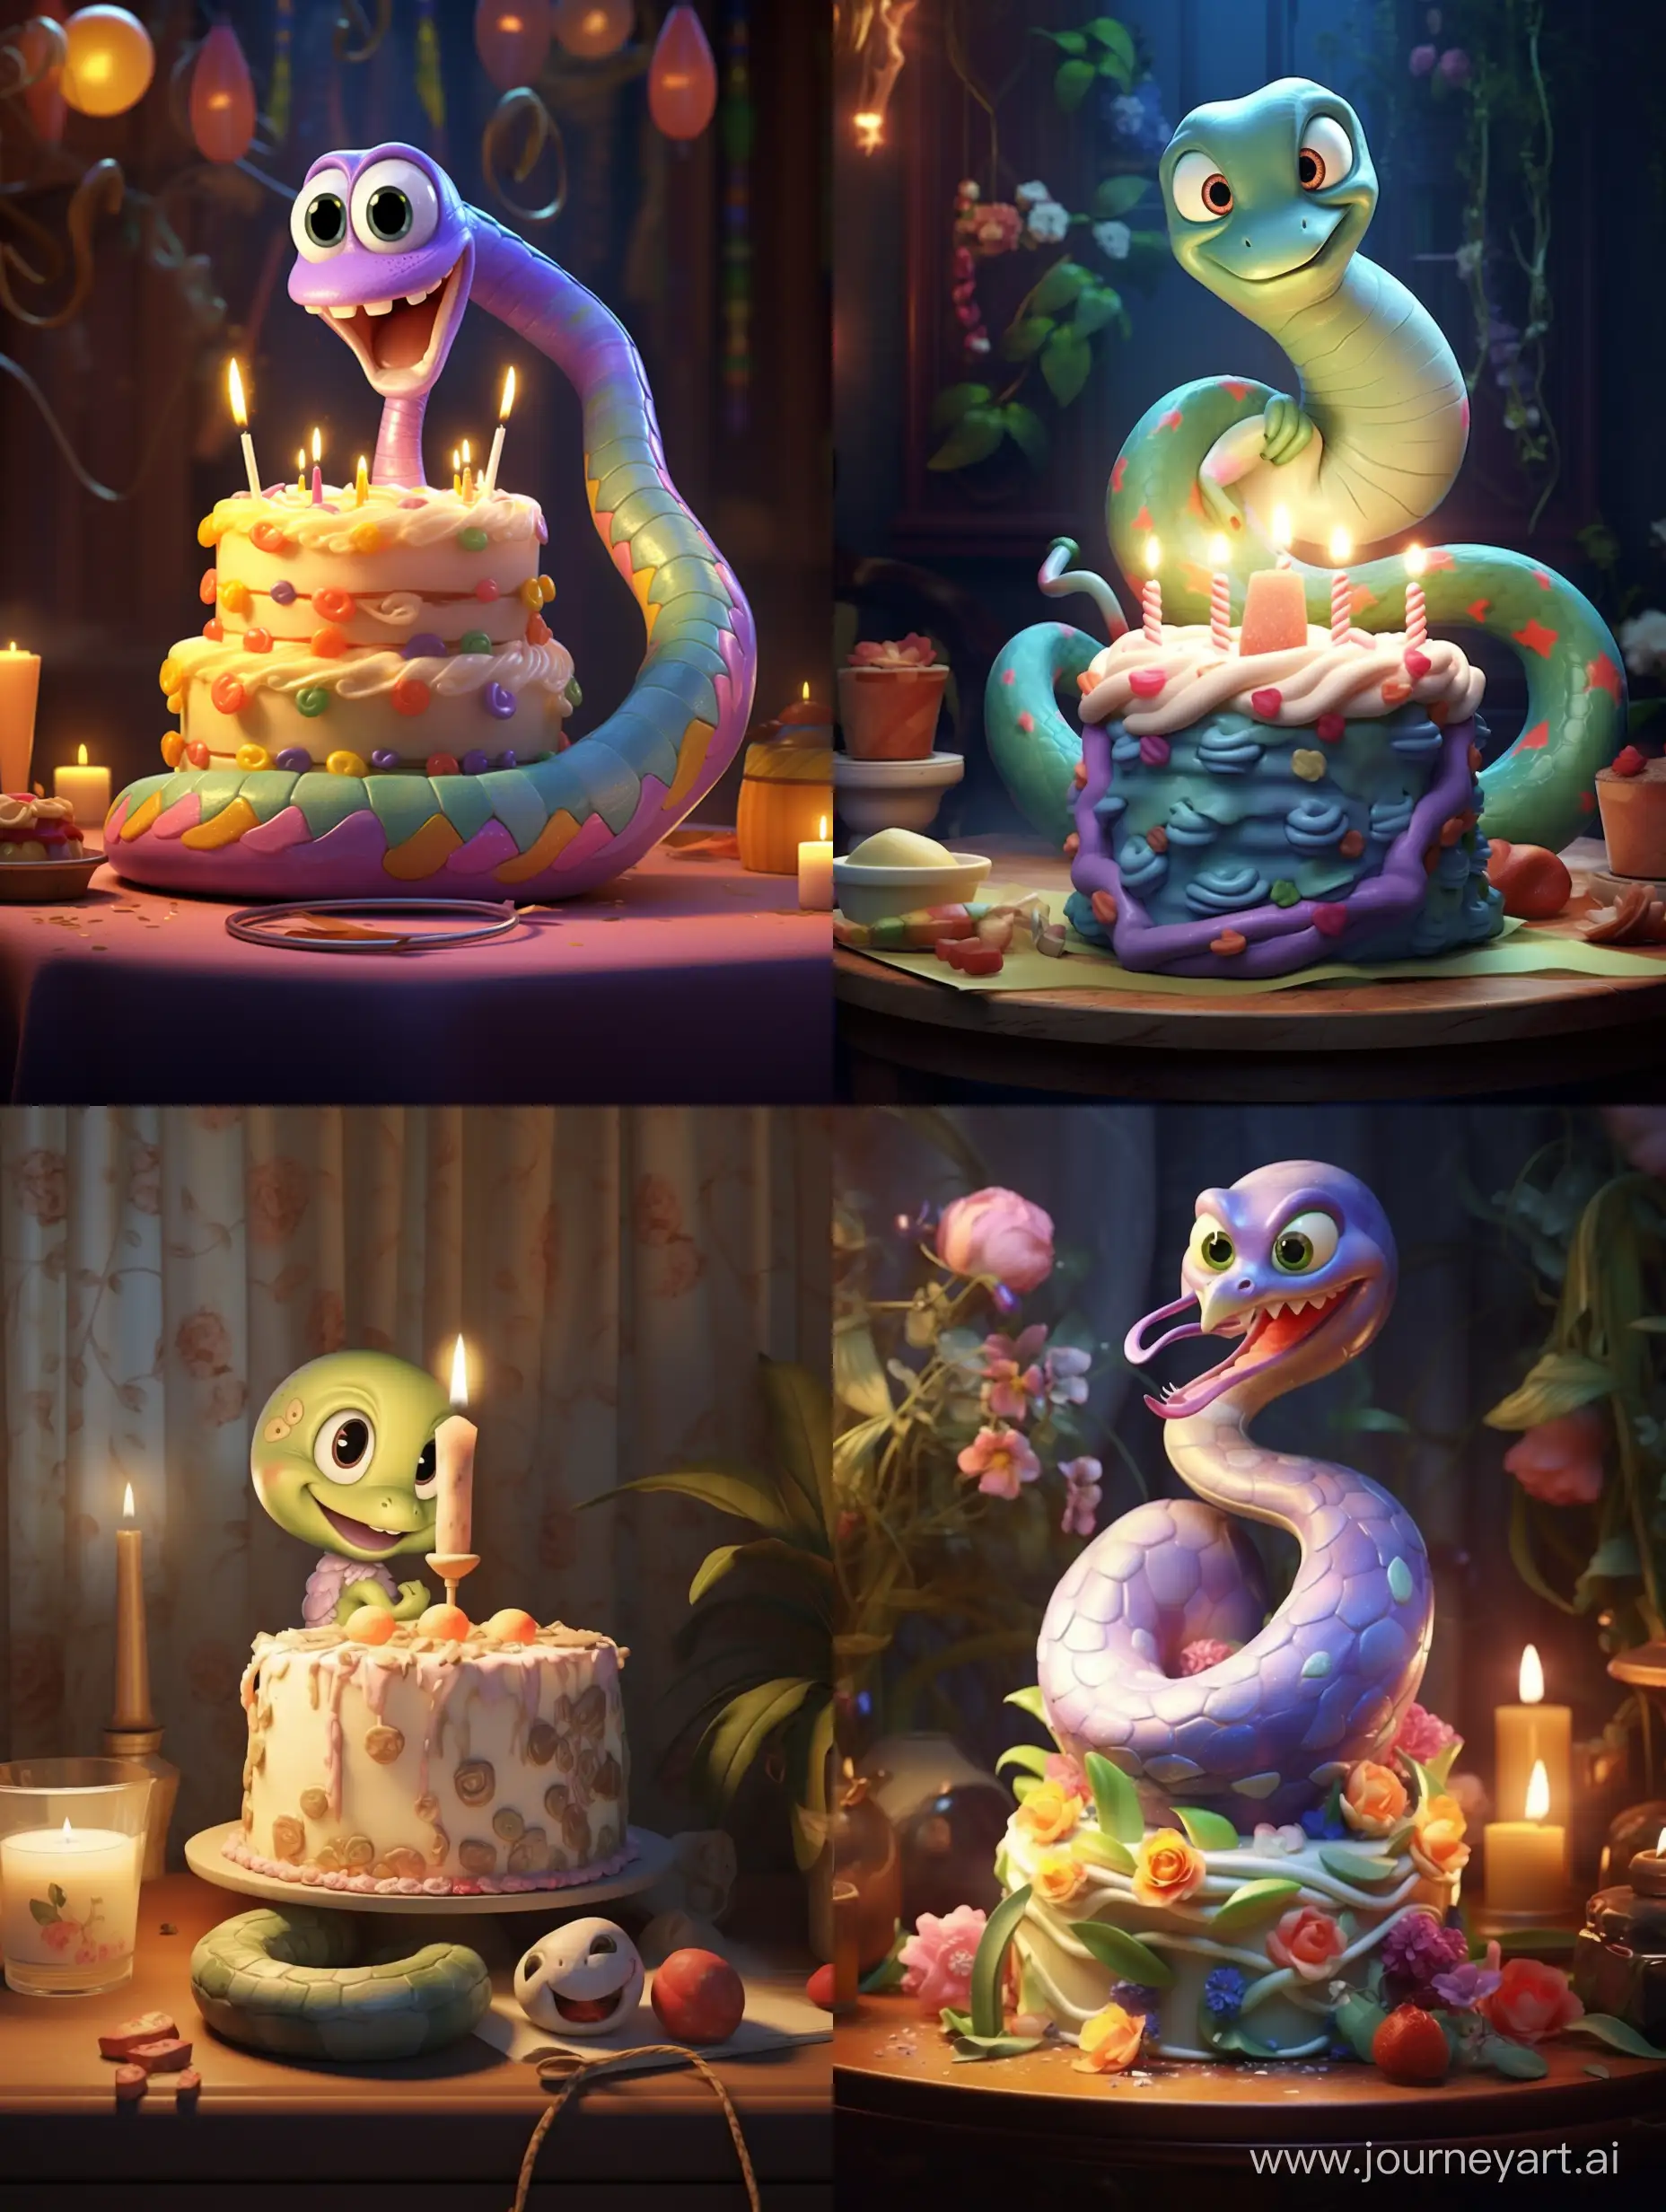 Whimsical-Snake-Celebration-with-Cake-and-Gifts-in-PixarDisney-Style